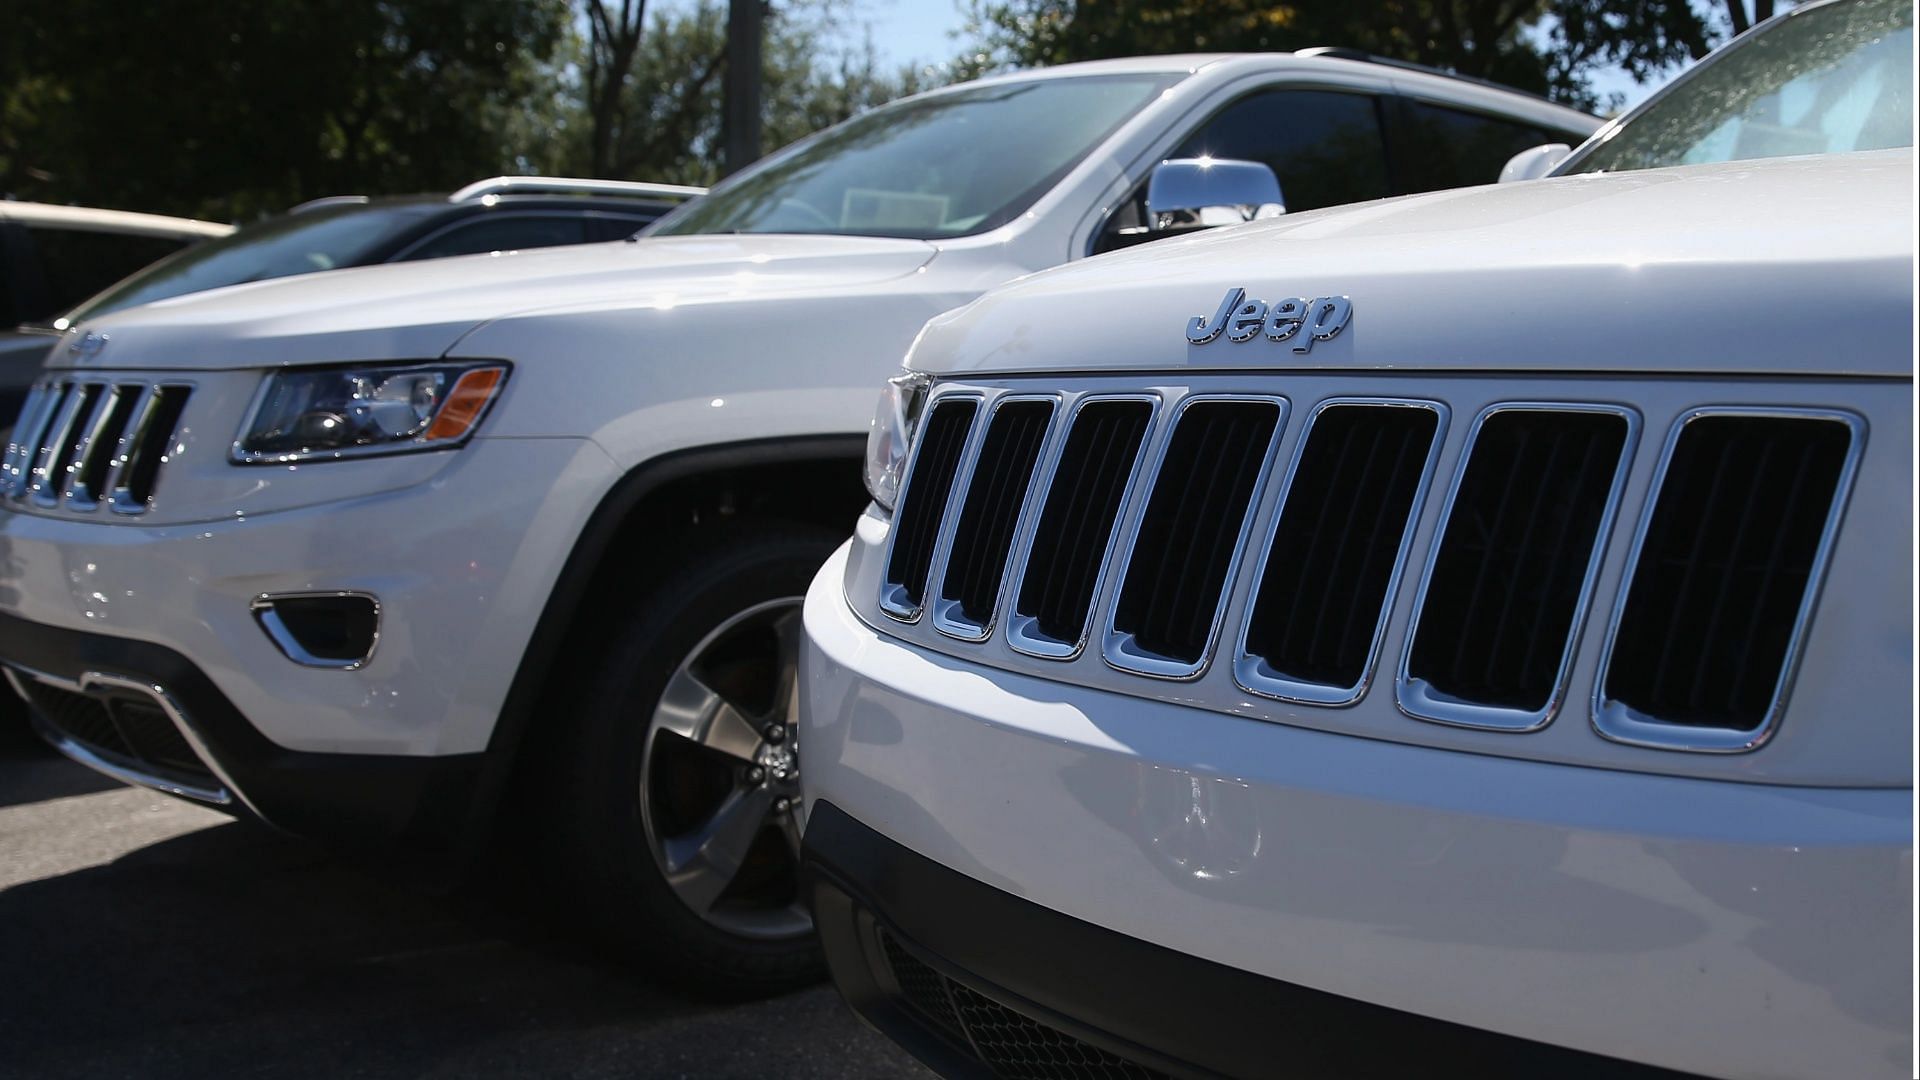 Over 200,000 Jeep Cherokee 2014-2016 model year SUVs are feared to be affected by the recall and pose fire hazard concerns (Image via Joe Raedle/ Getty Images)